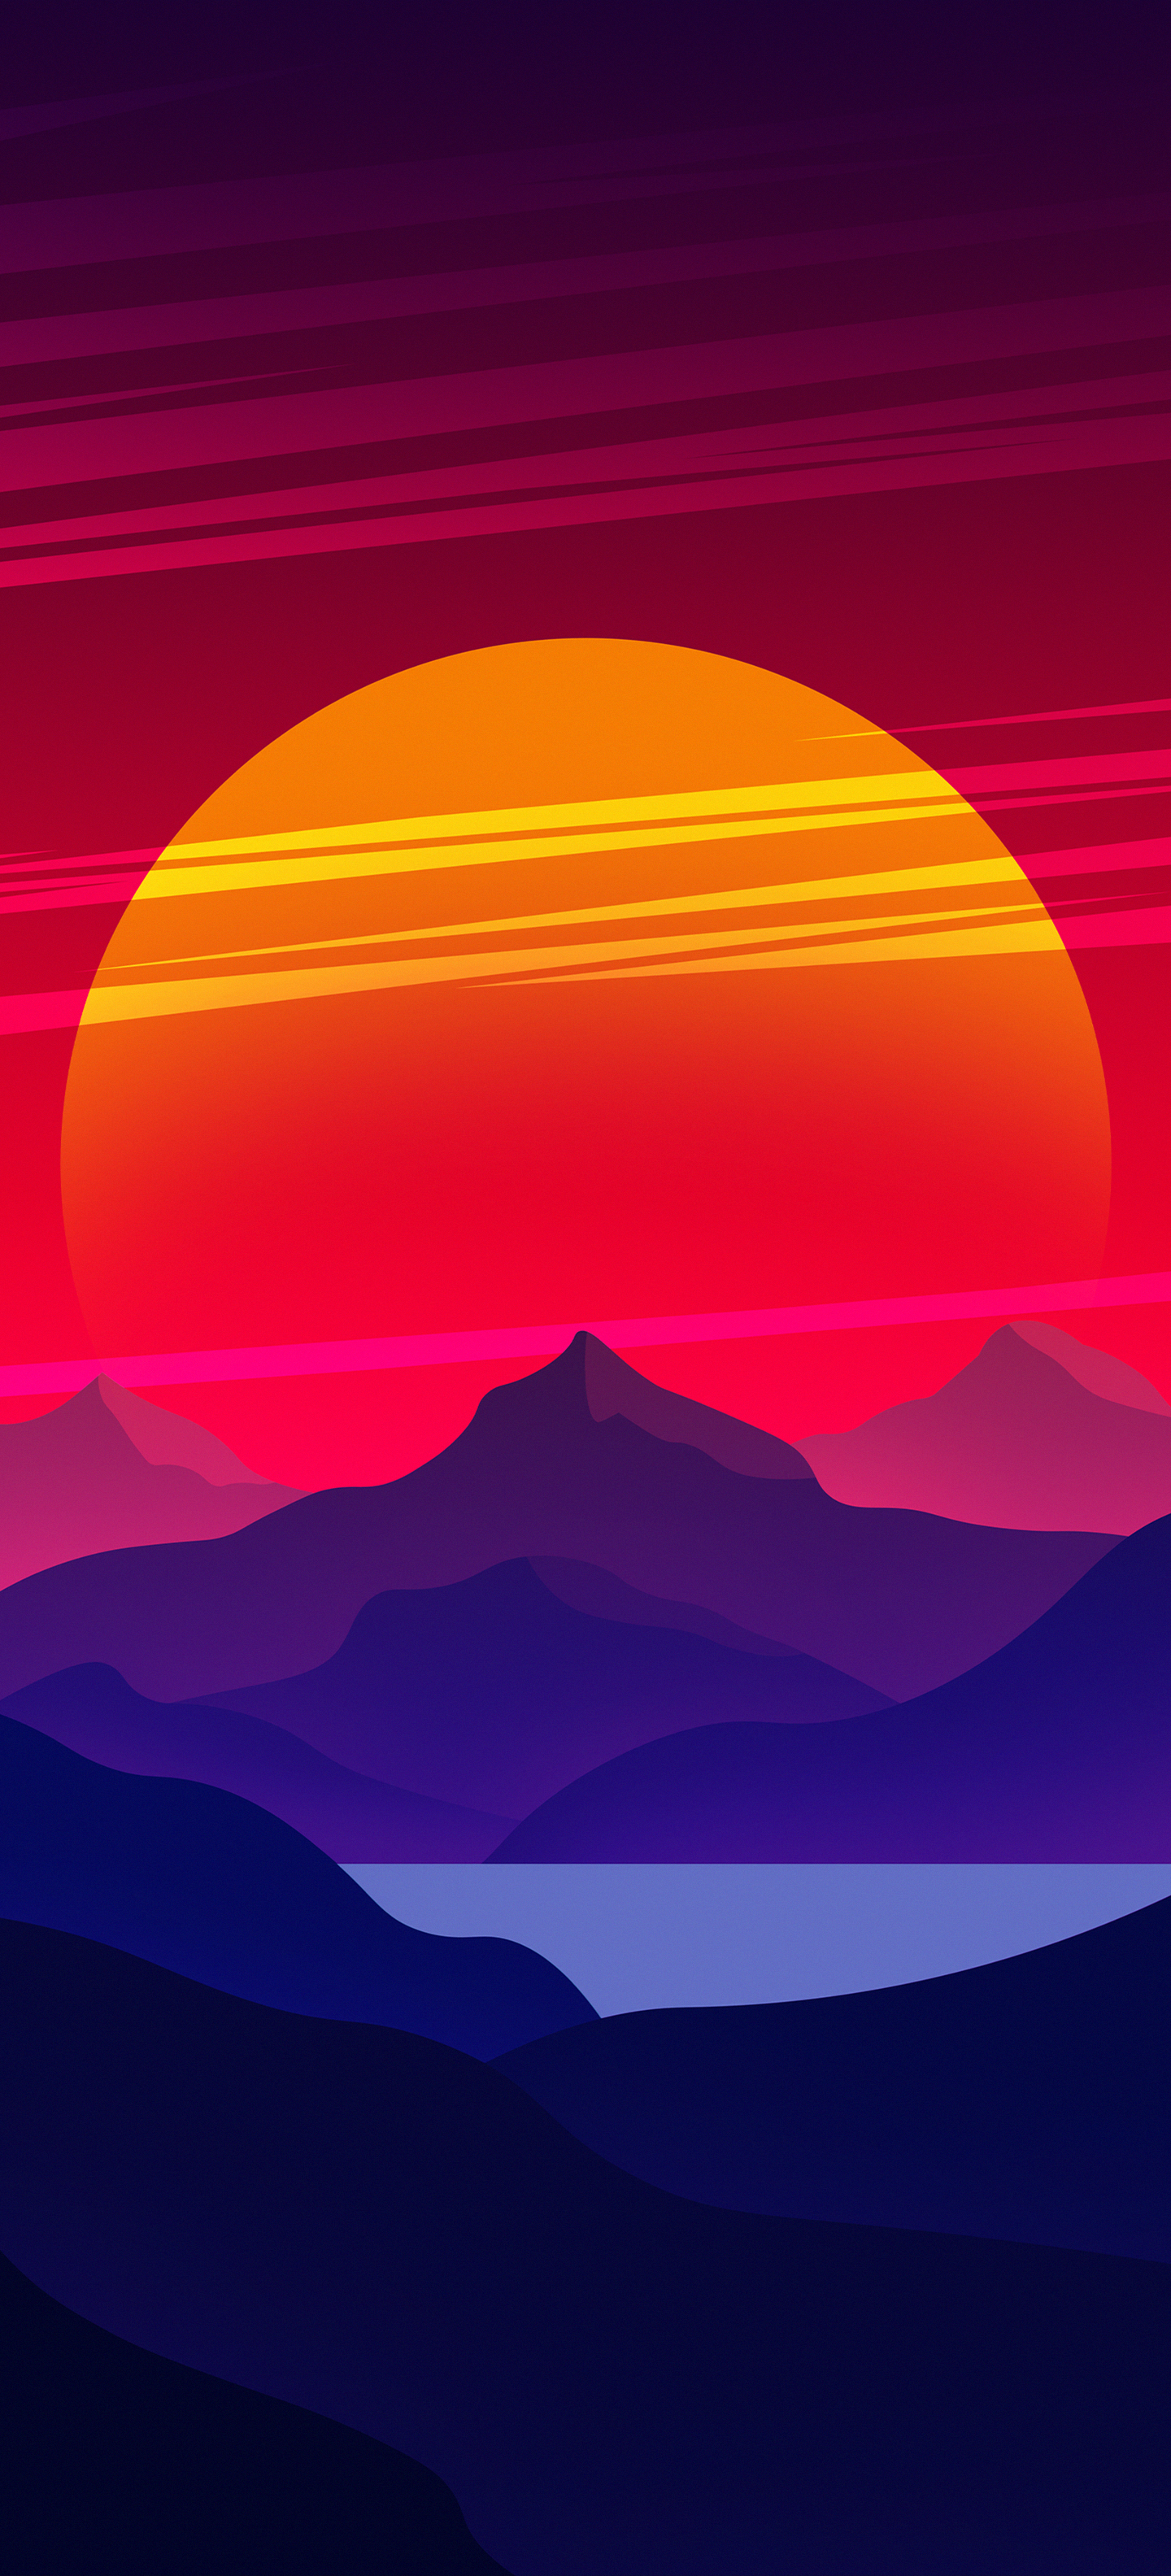 Sci-fi mountain scenes iPhone wallpapers from the 80's